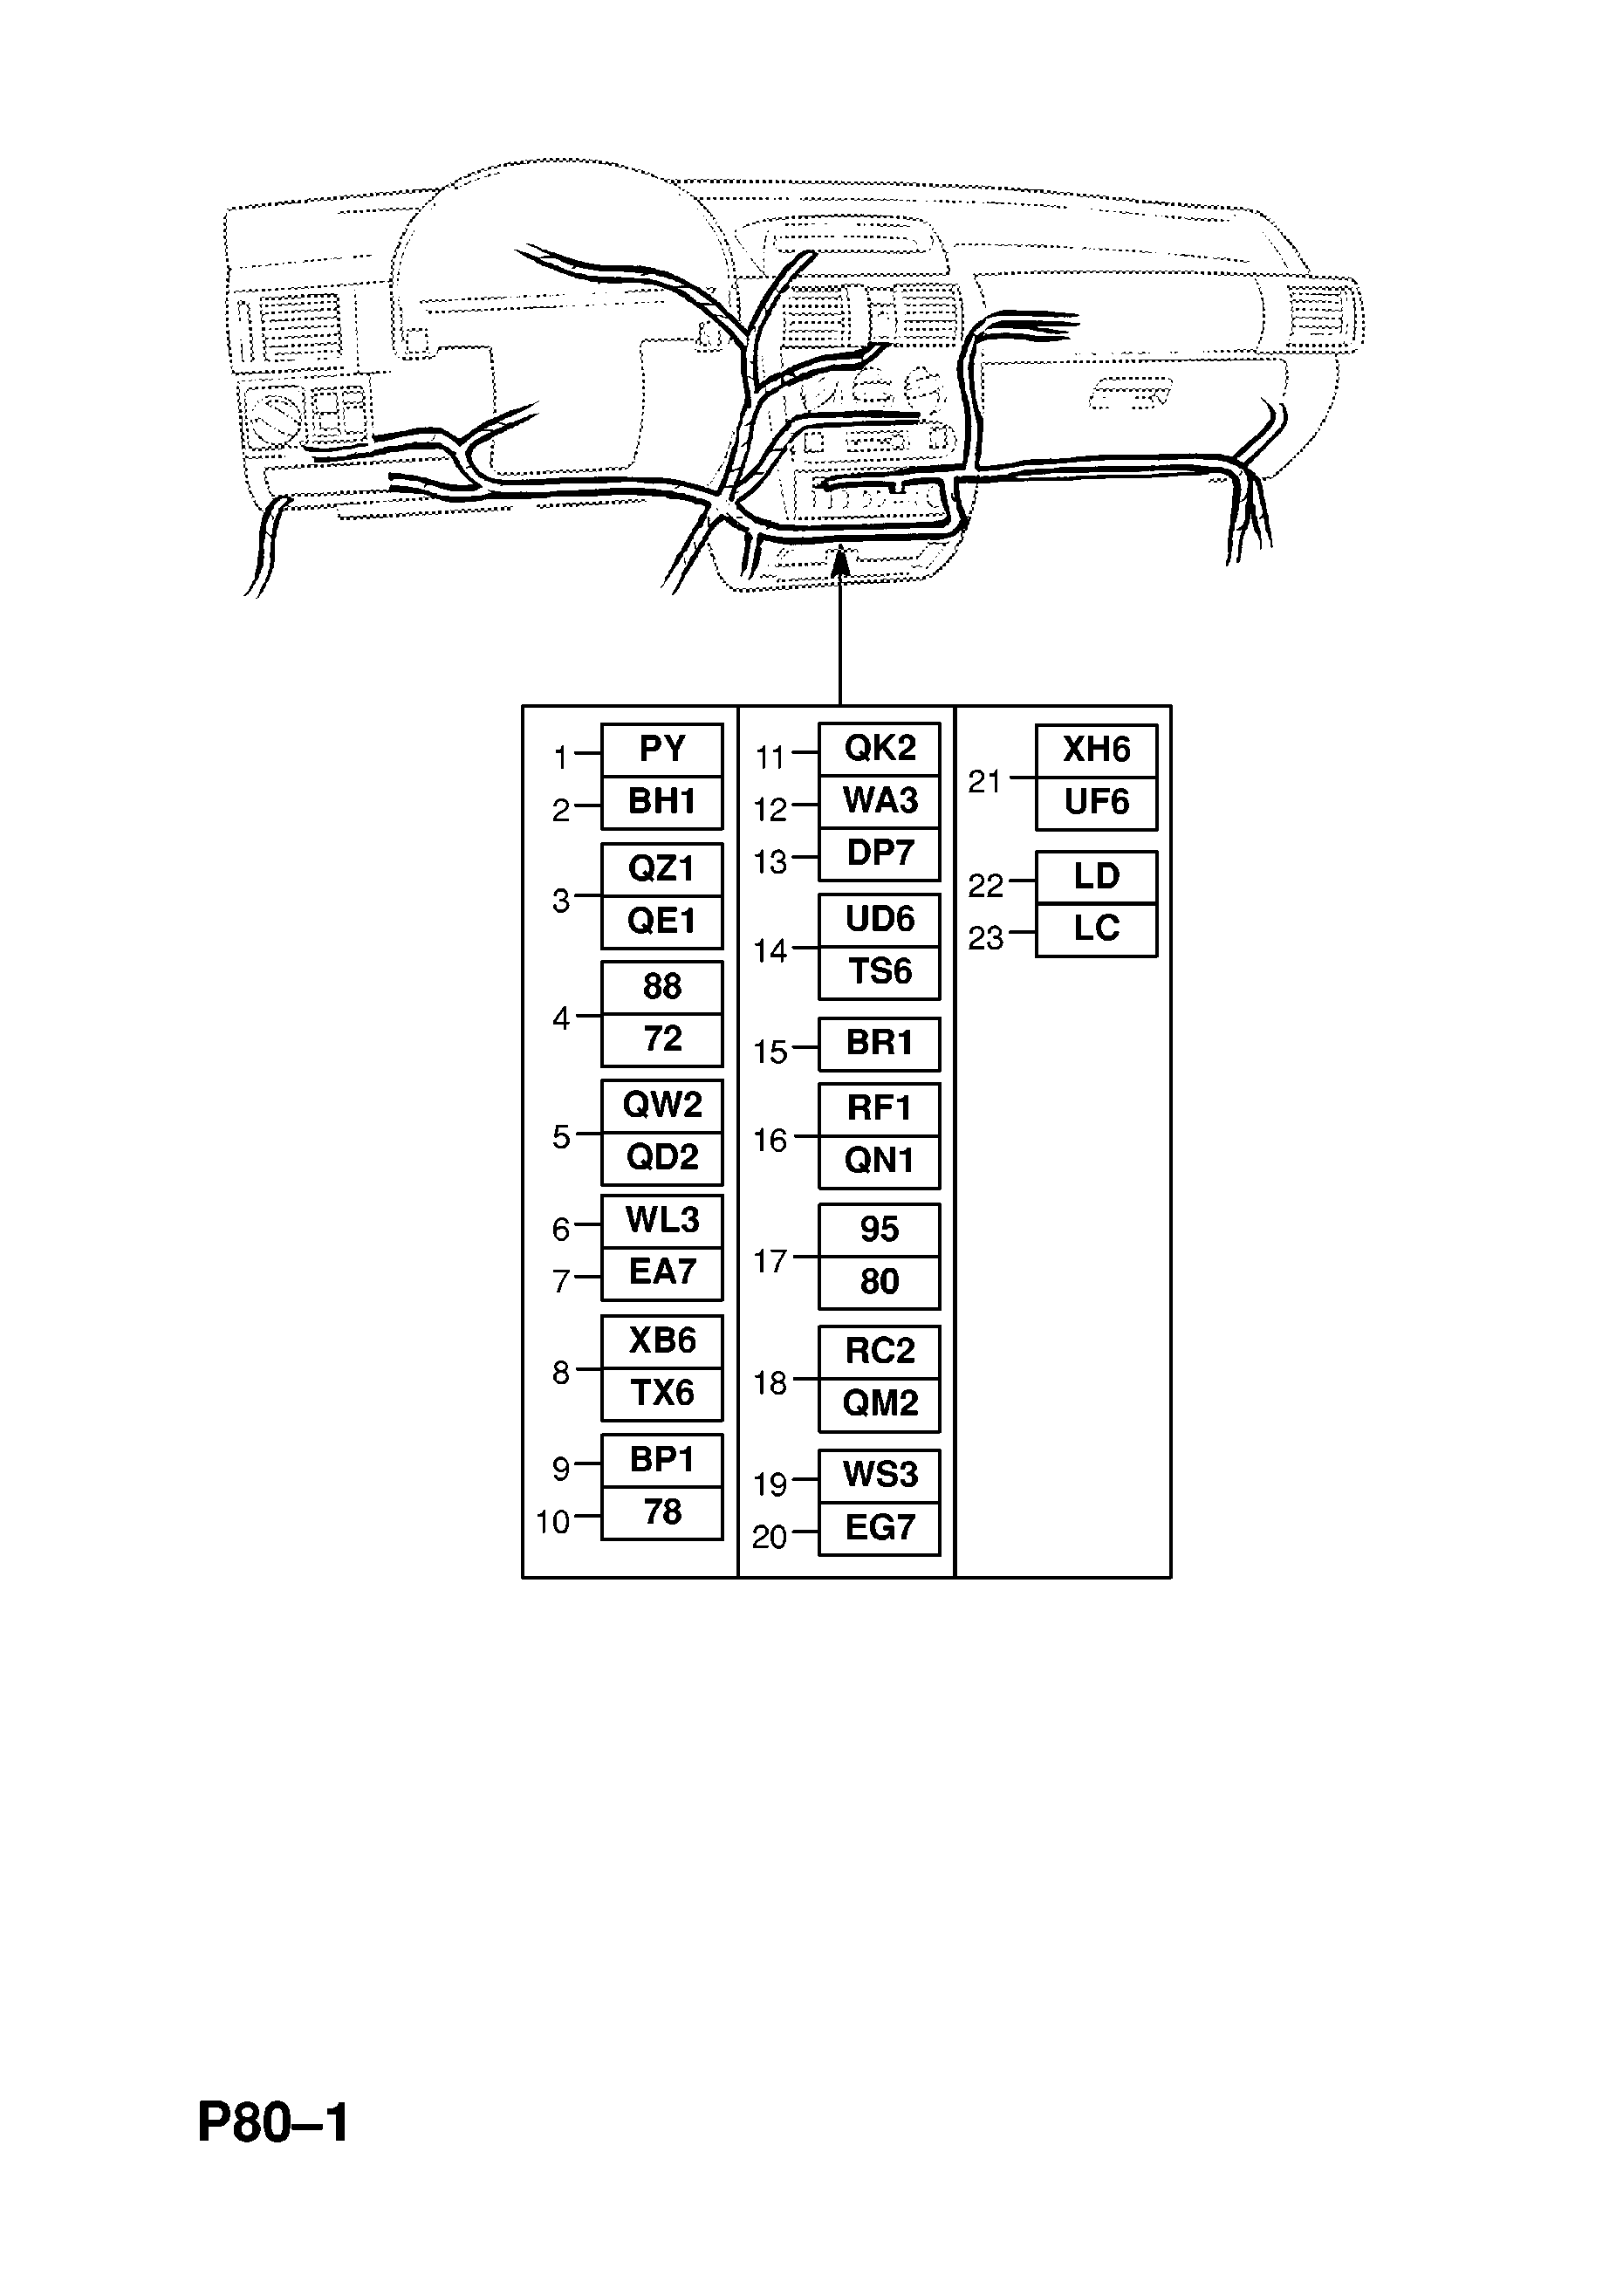 INSTRUMENT PANEL WIRING HARNESS (CONTD.) <small><i>[USED WITH AIR CONDITIONING AND ANTI-THEFT WARNING SYSTEM (CONTD.) COMBO,HATCH,VAN (71,73,78,79,F25,F08,F68,M68) (CONTD.)]</i></small>